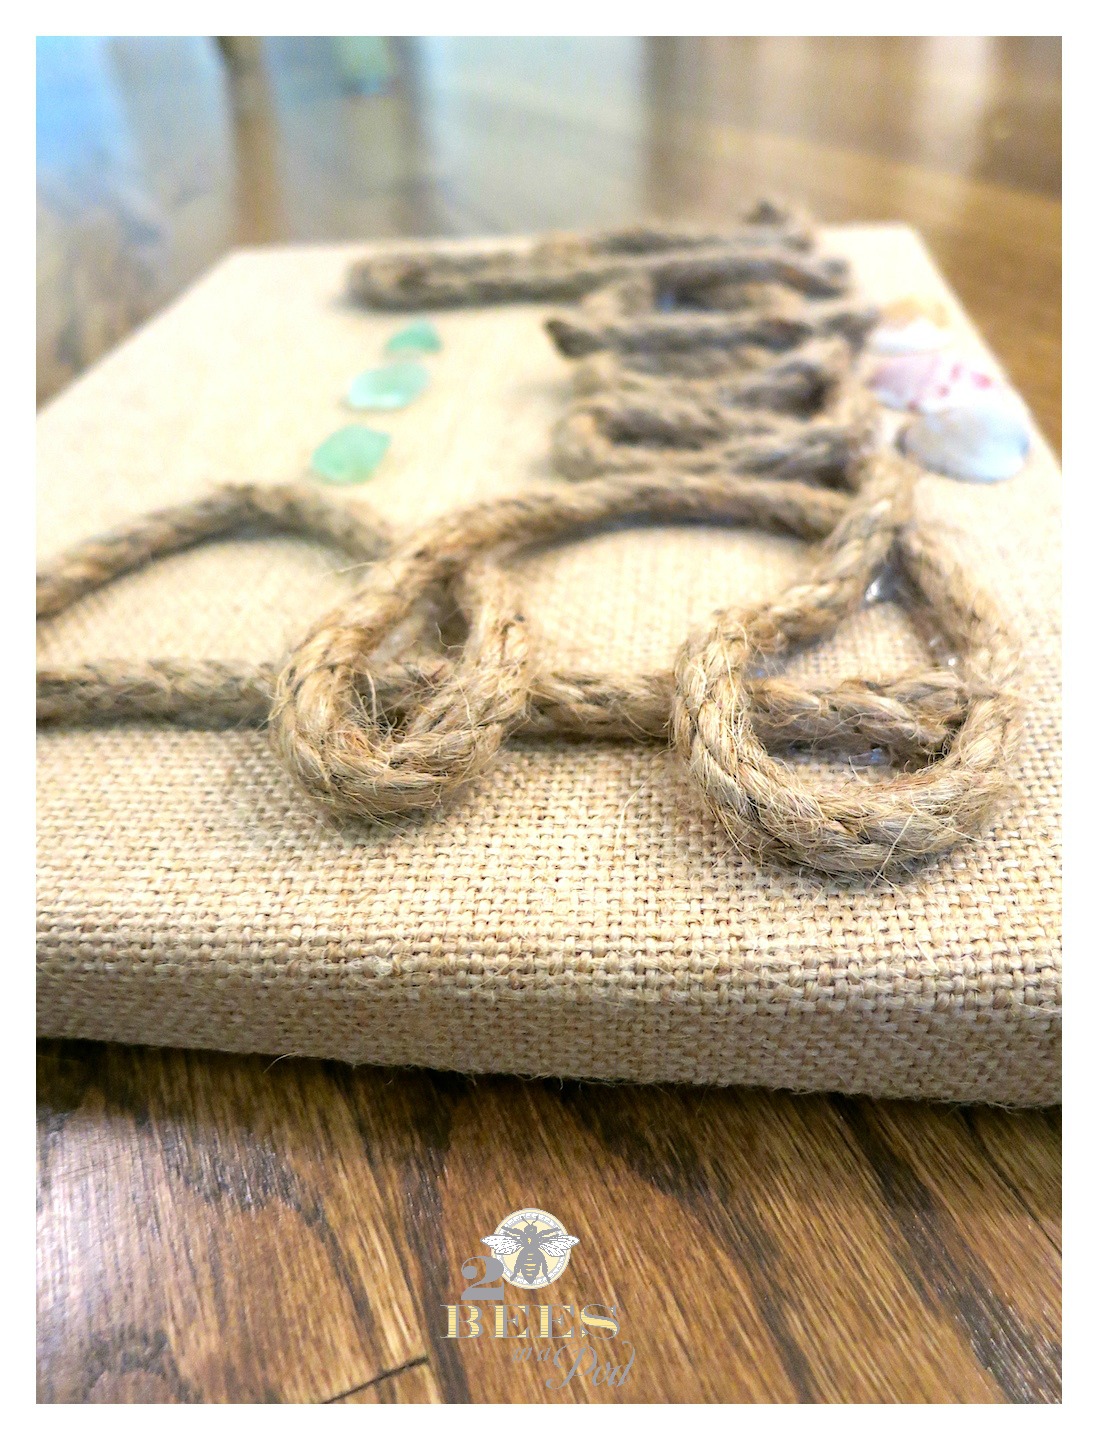 DIY Burlap Canvas Beach Art. Super simple artwork - add jute or rope to spell out "Beach" and embellish with shells and sea glass!